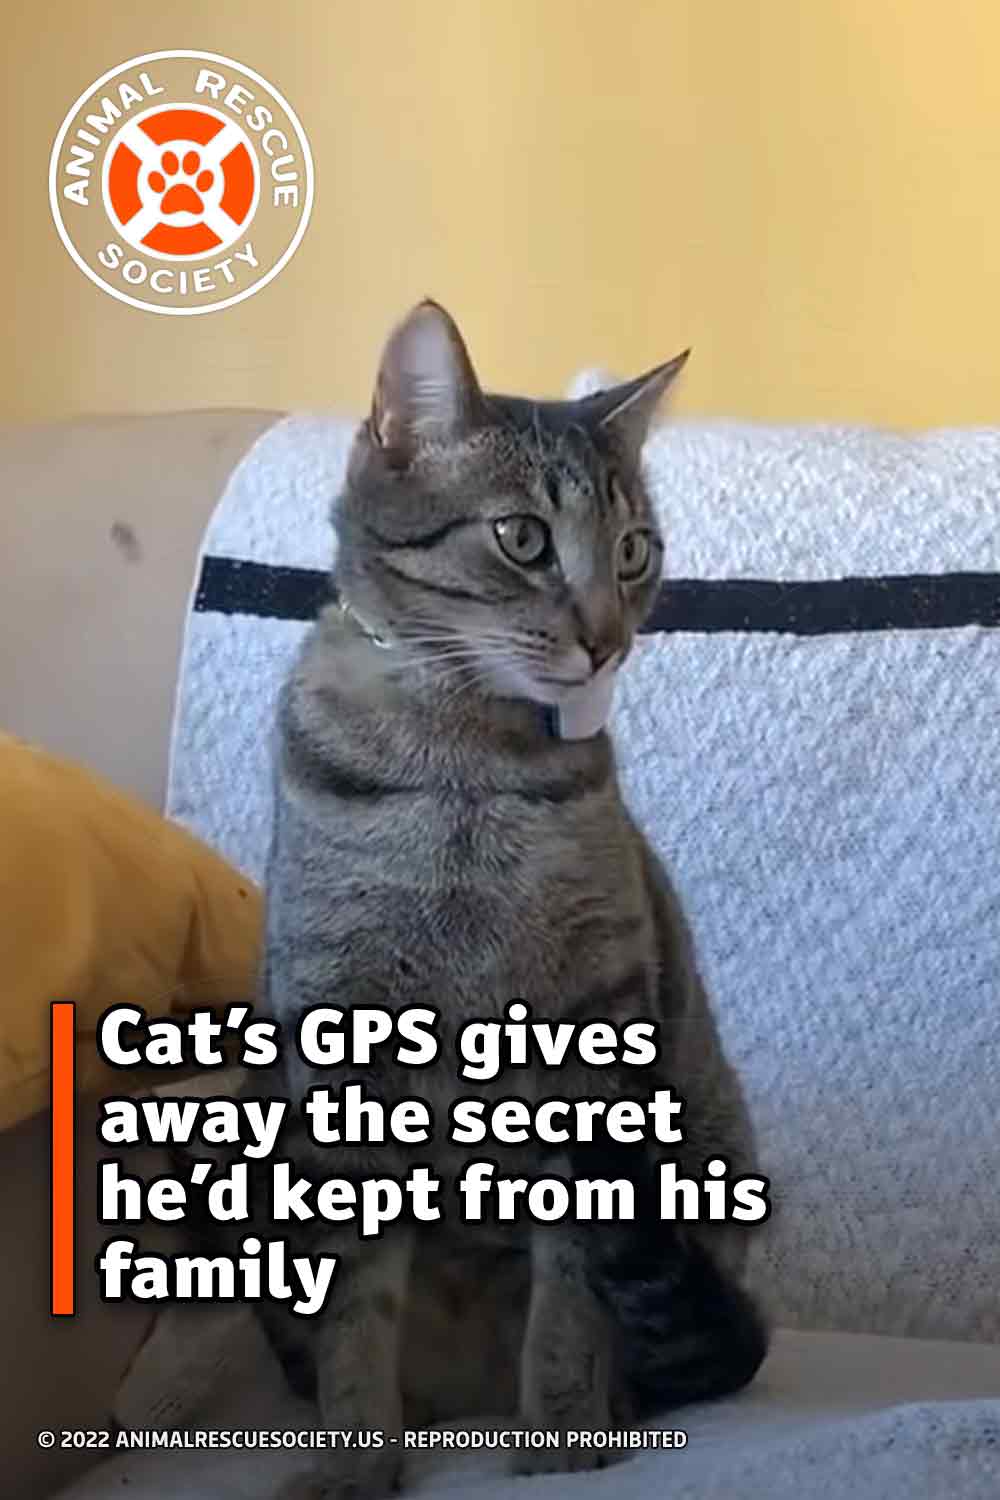 Cat’s GPS gives away the secret he’d kept from his family